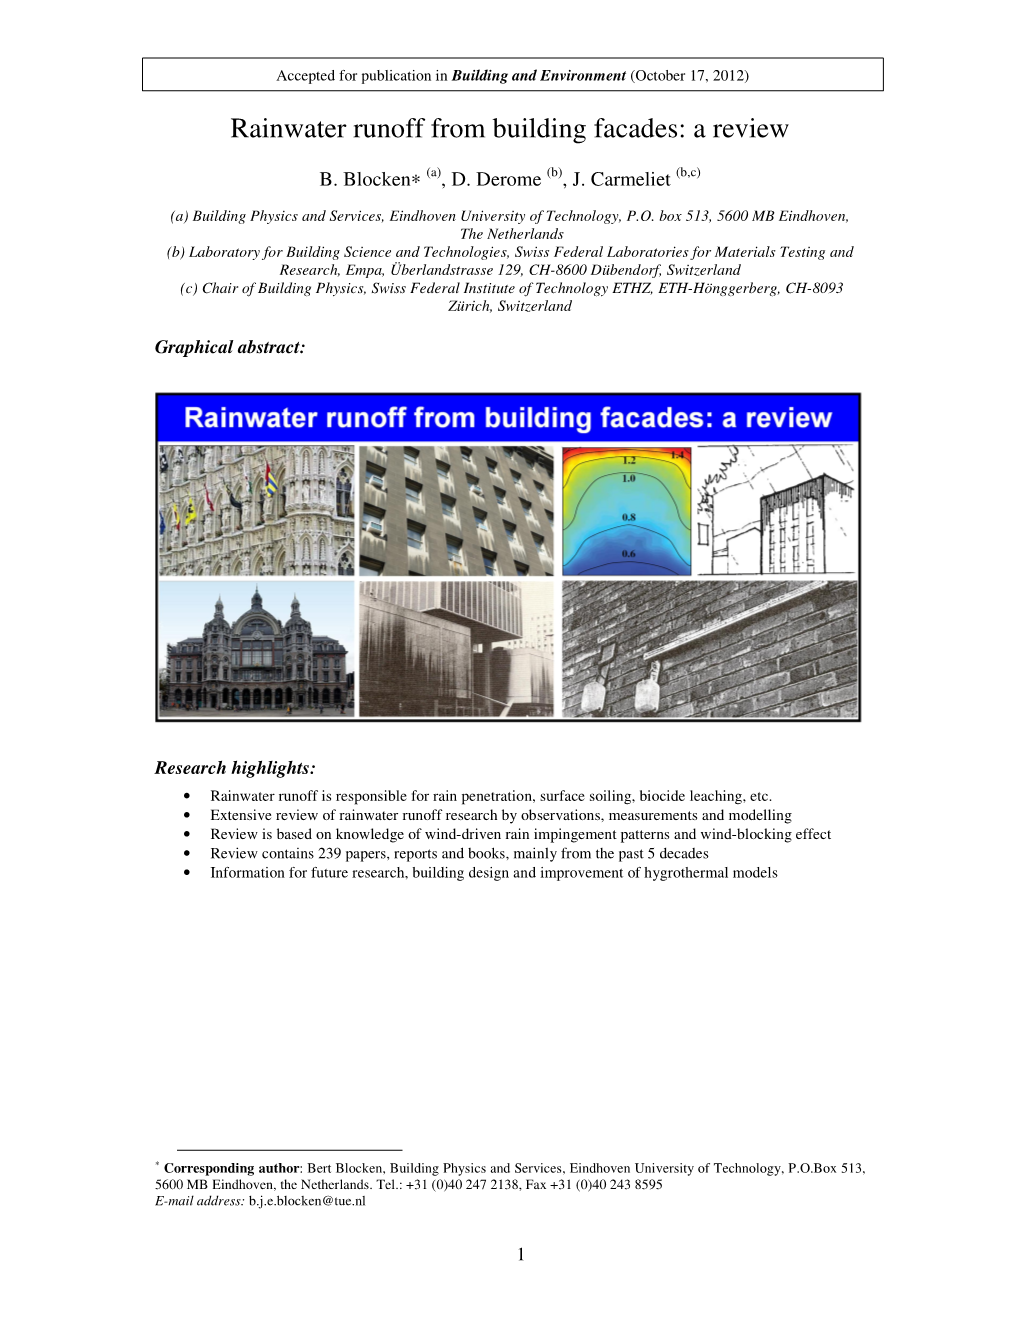 Rainwater Runoff from Building Facades: a Review